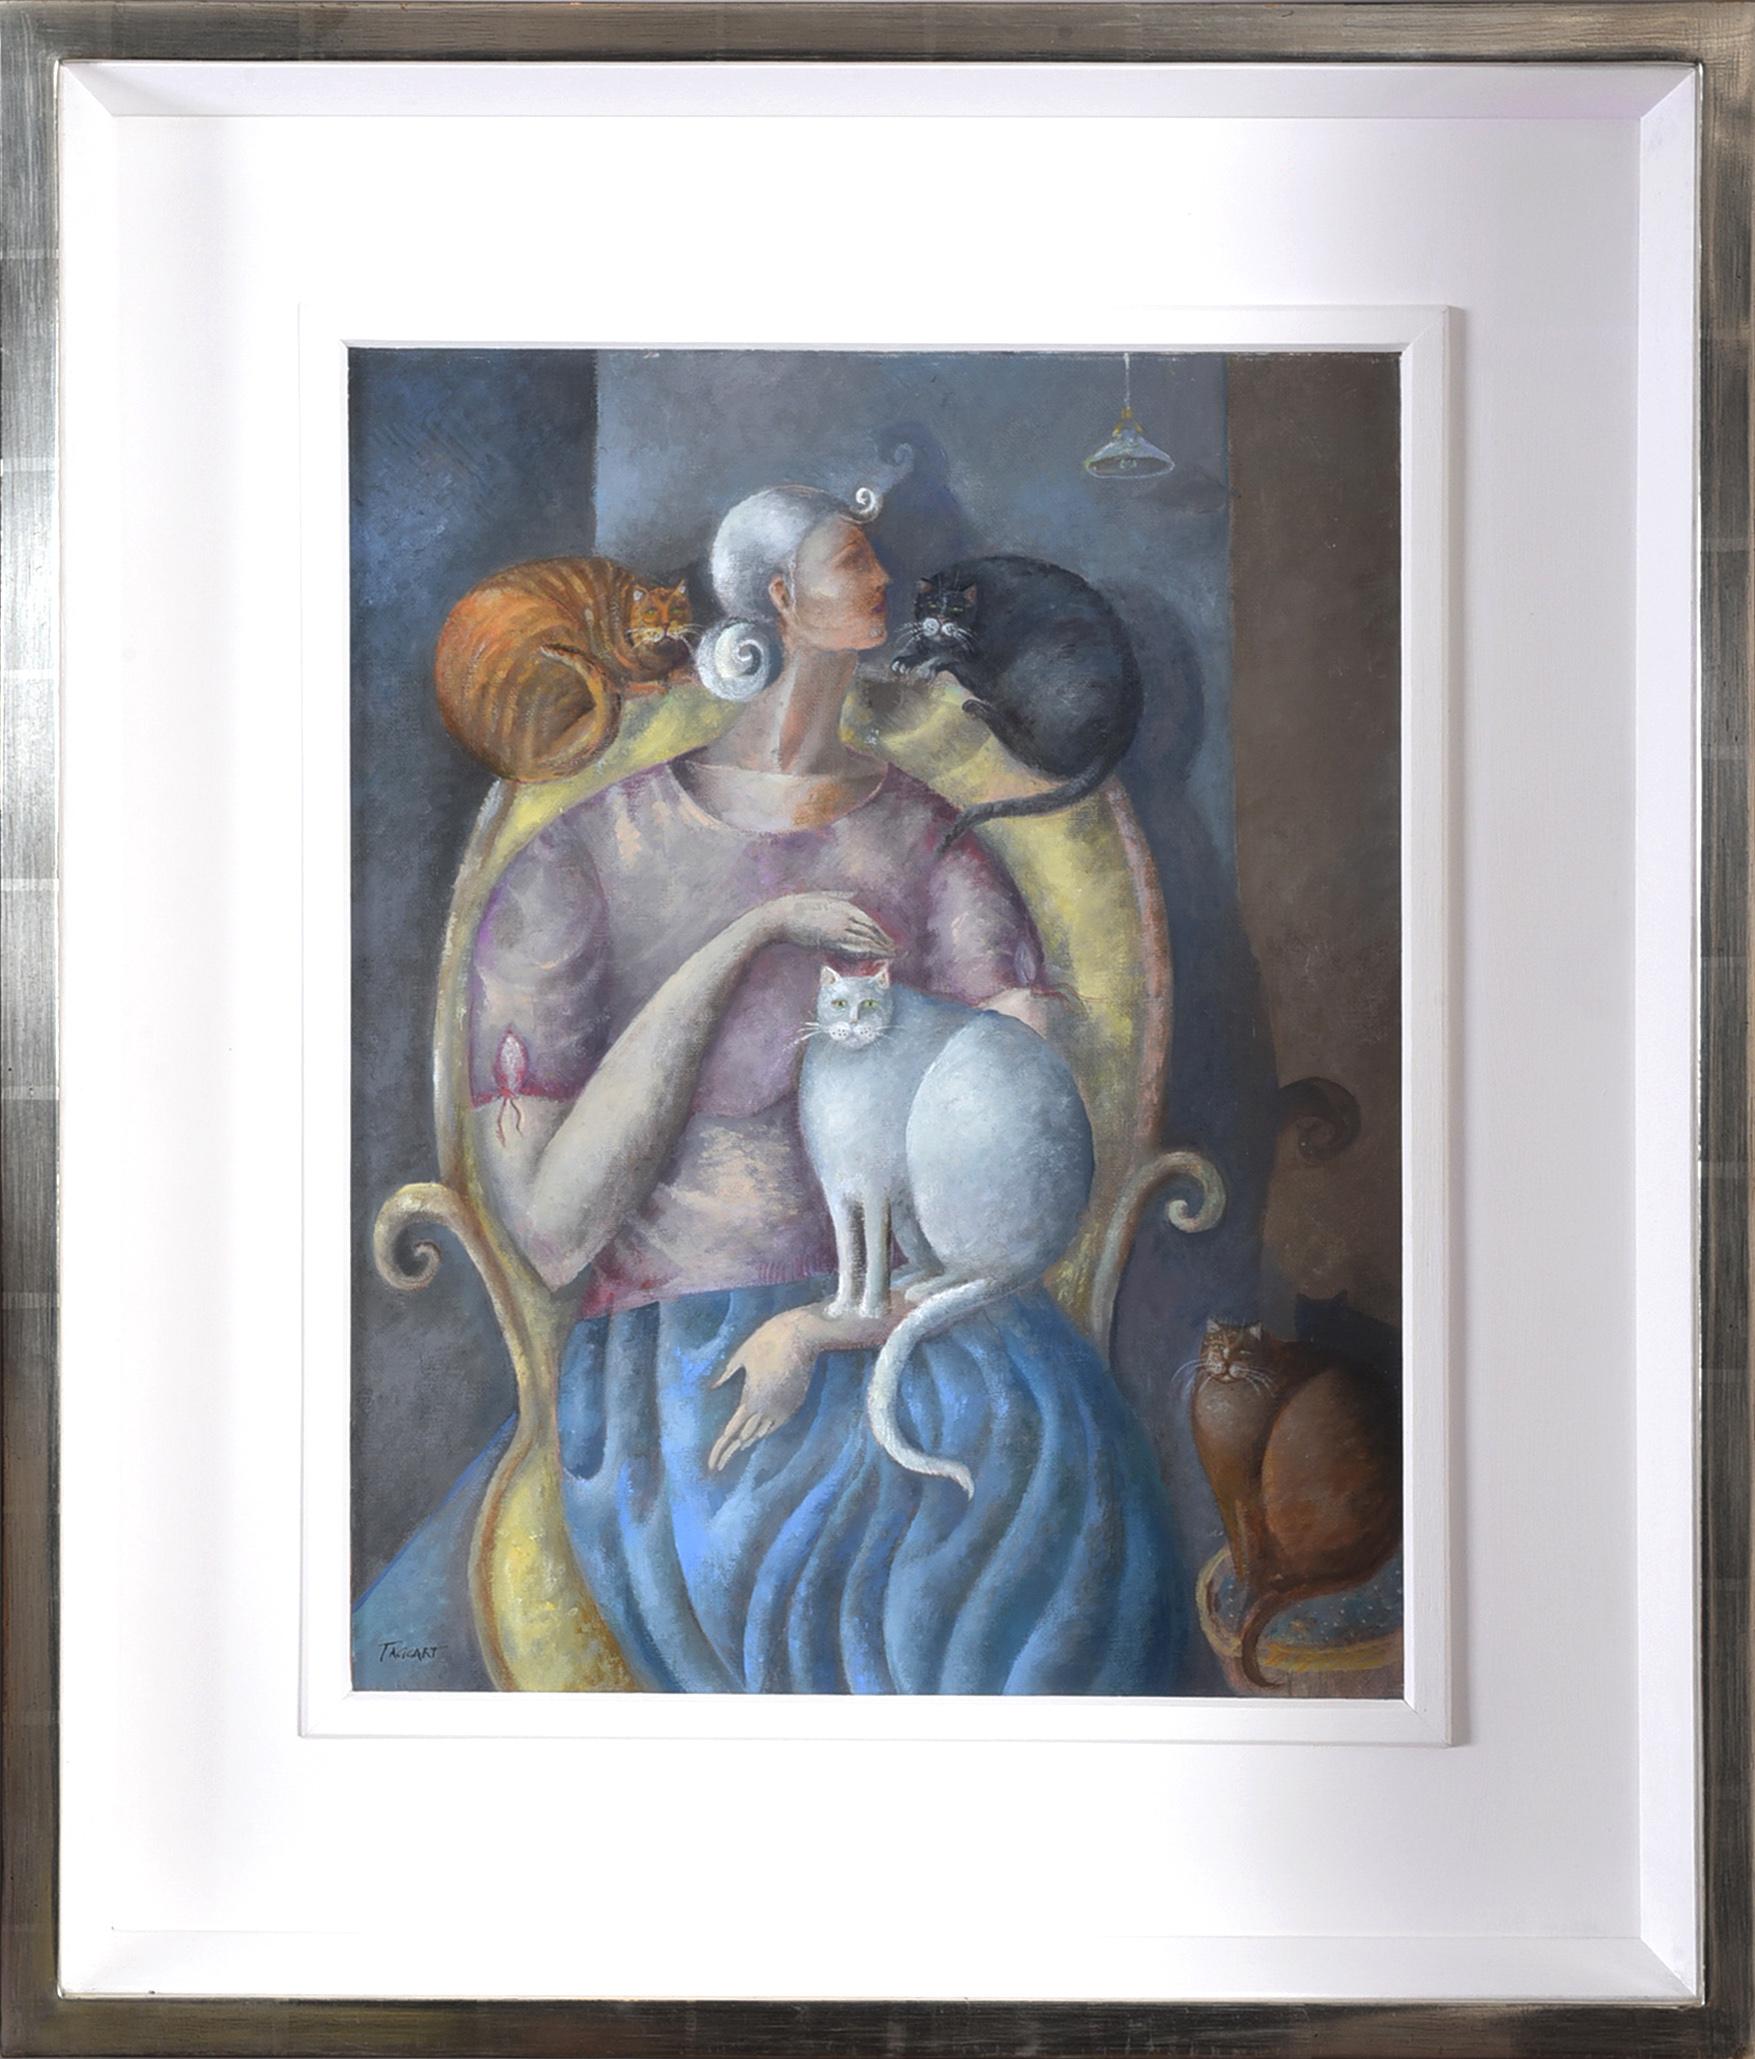 Measures: 19 x 15 inches (29 x 25 inches framed)
Oil on board
Signed
Framed.

Born in 1943, Irish artist Elizabeth Taggart is renowned for her flamboyant style and meticulous attention to detail. She studied at the Belfast College of Art and claims